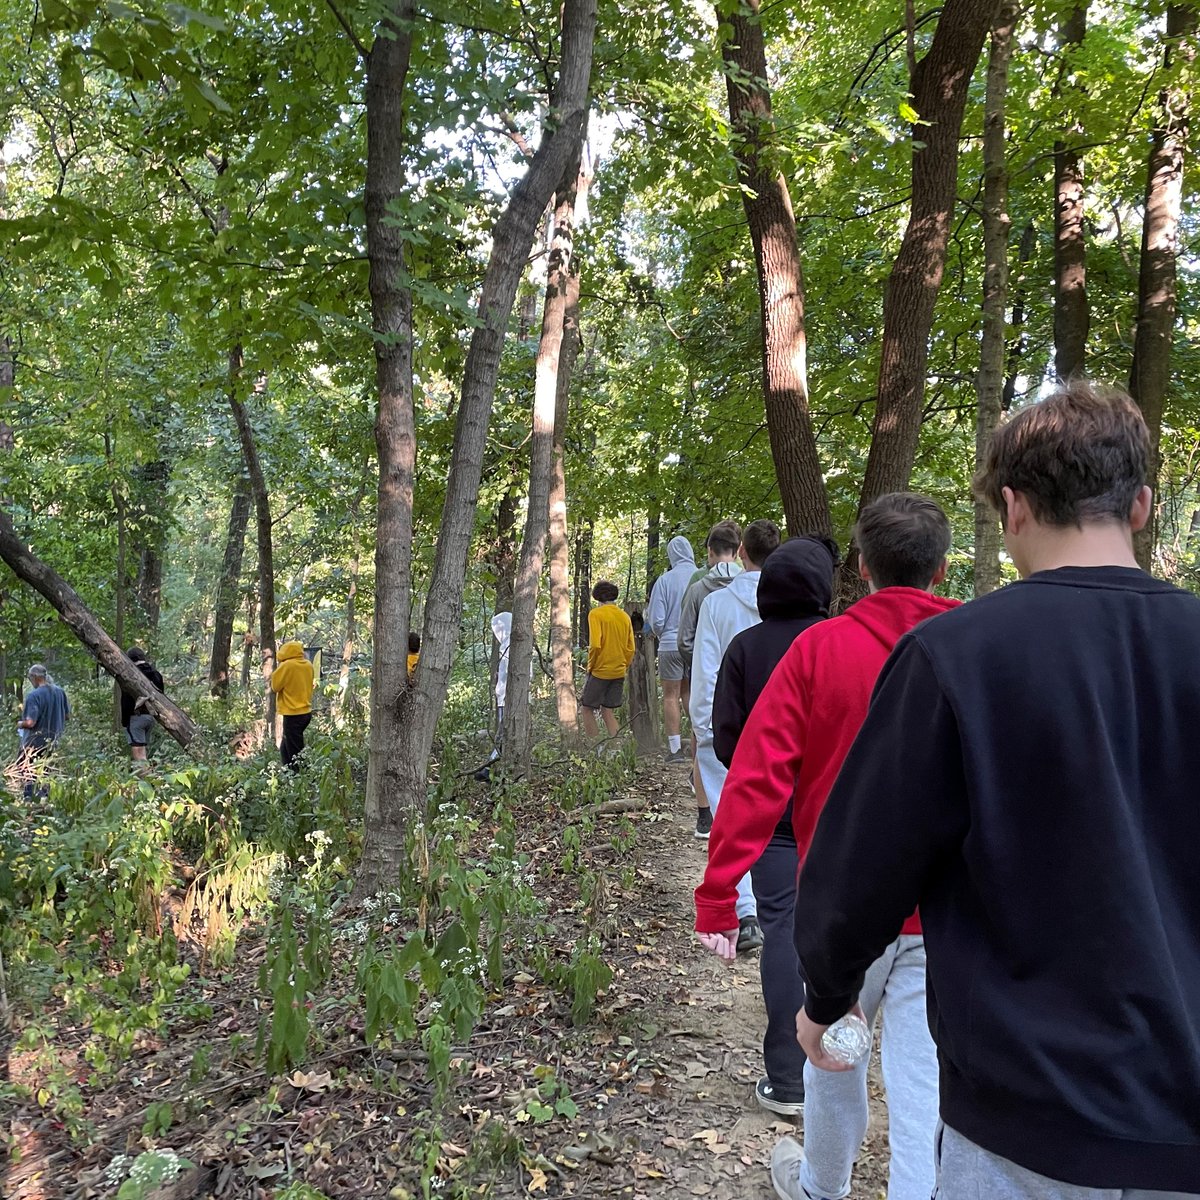 Please pray again for sophomores and their leaders who are headed to @PESCLouisville today for the Our Place in Nature Retreat. They will walk trails, learn from each other, and gain a new understanding for their place in this world. #WeAreStX